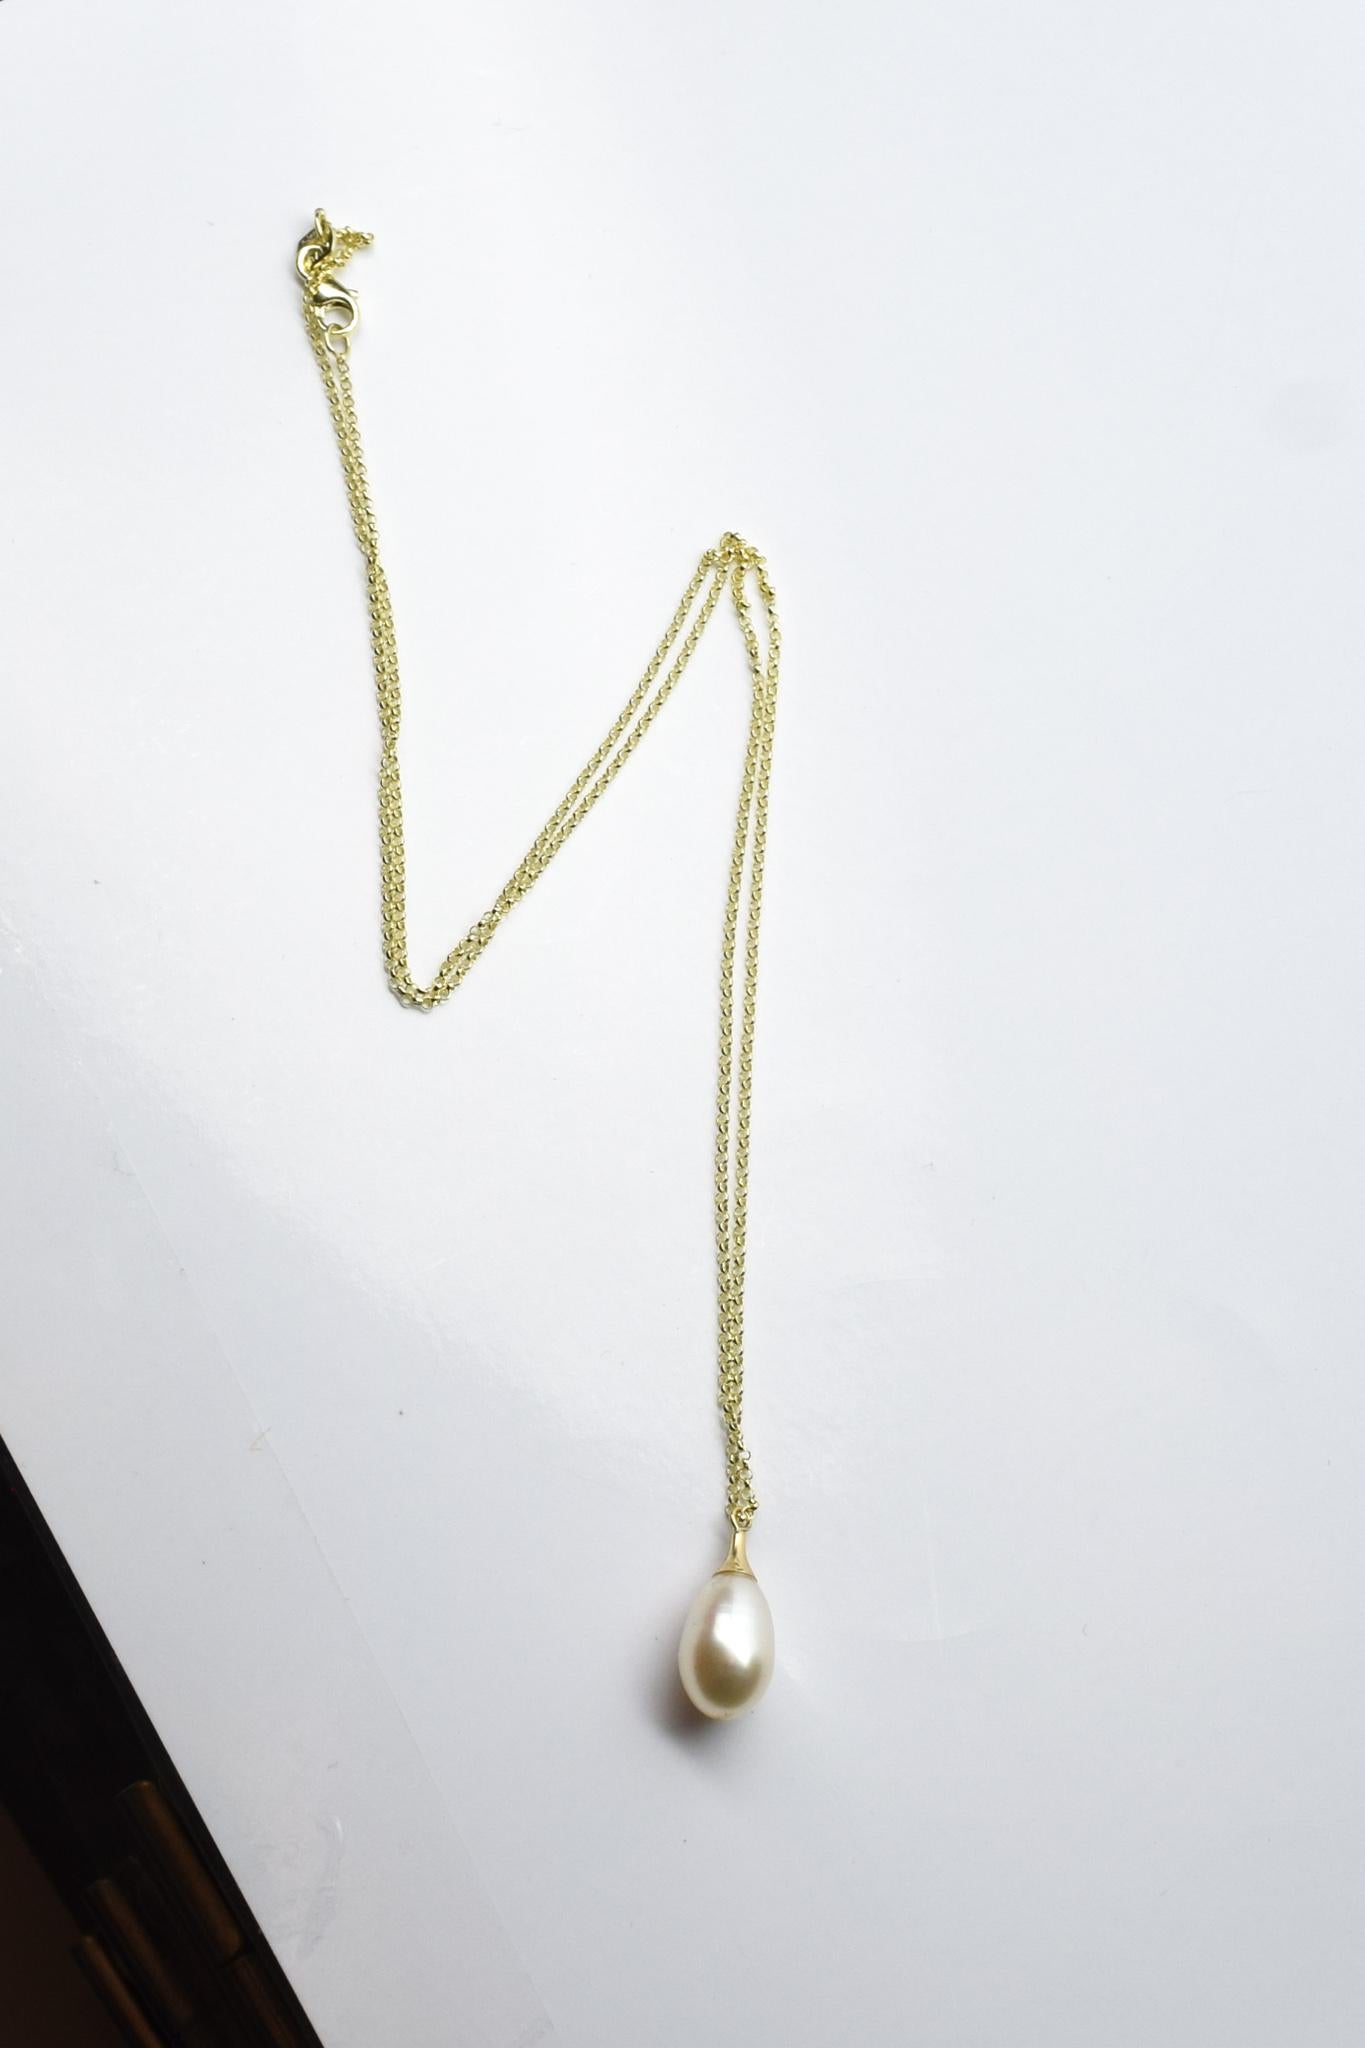 Simple and modern natural freshwater pearl pendant necklace in 14KT yellow gold!

Certificate of authenticity comes with purchase

ABOUT US
We are a family-owned business. Our studio in located in the heart of Boca Raton at the International